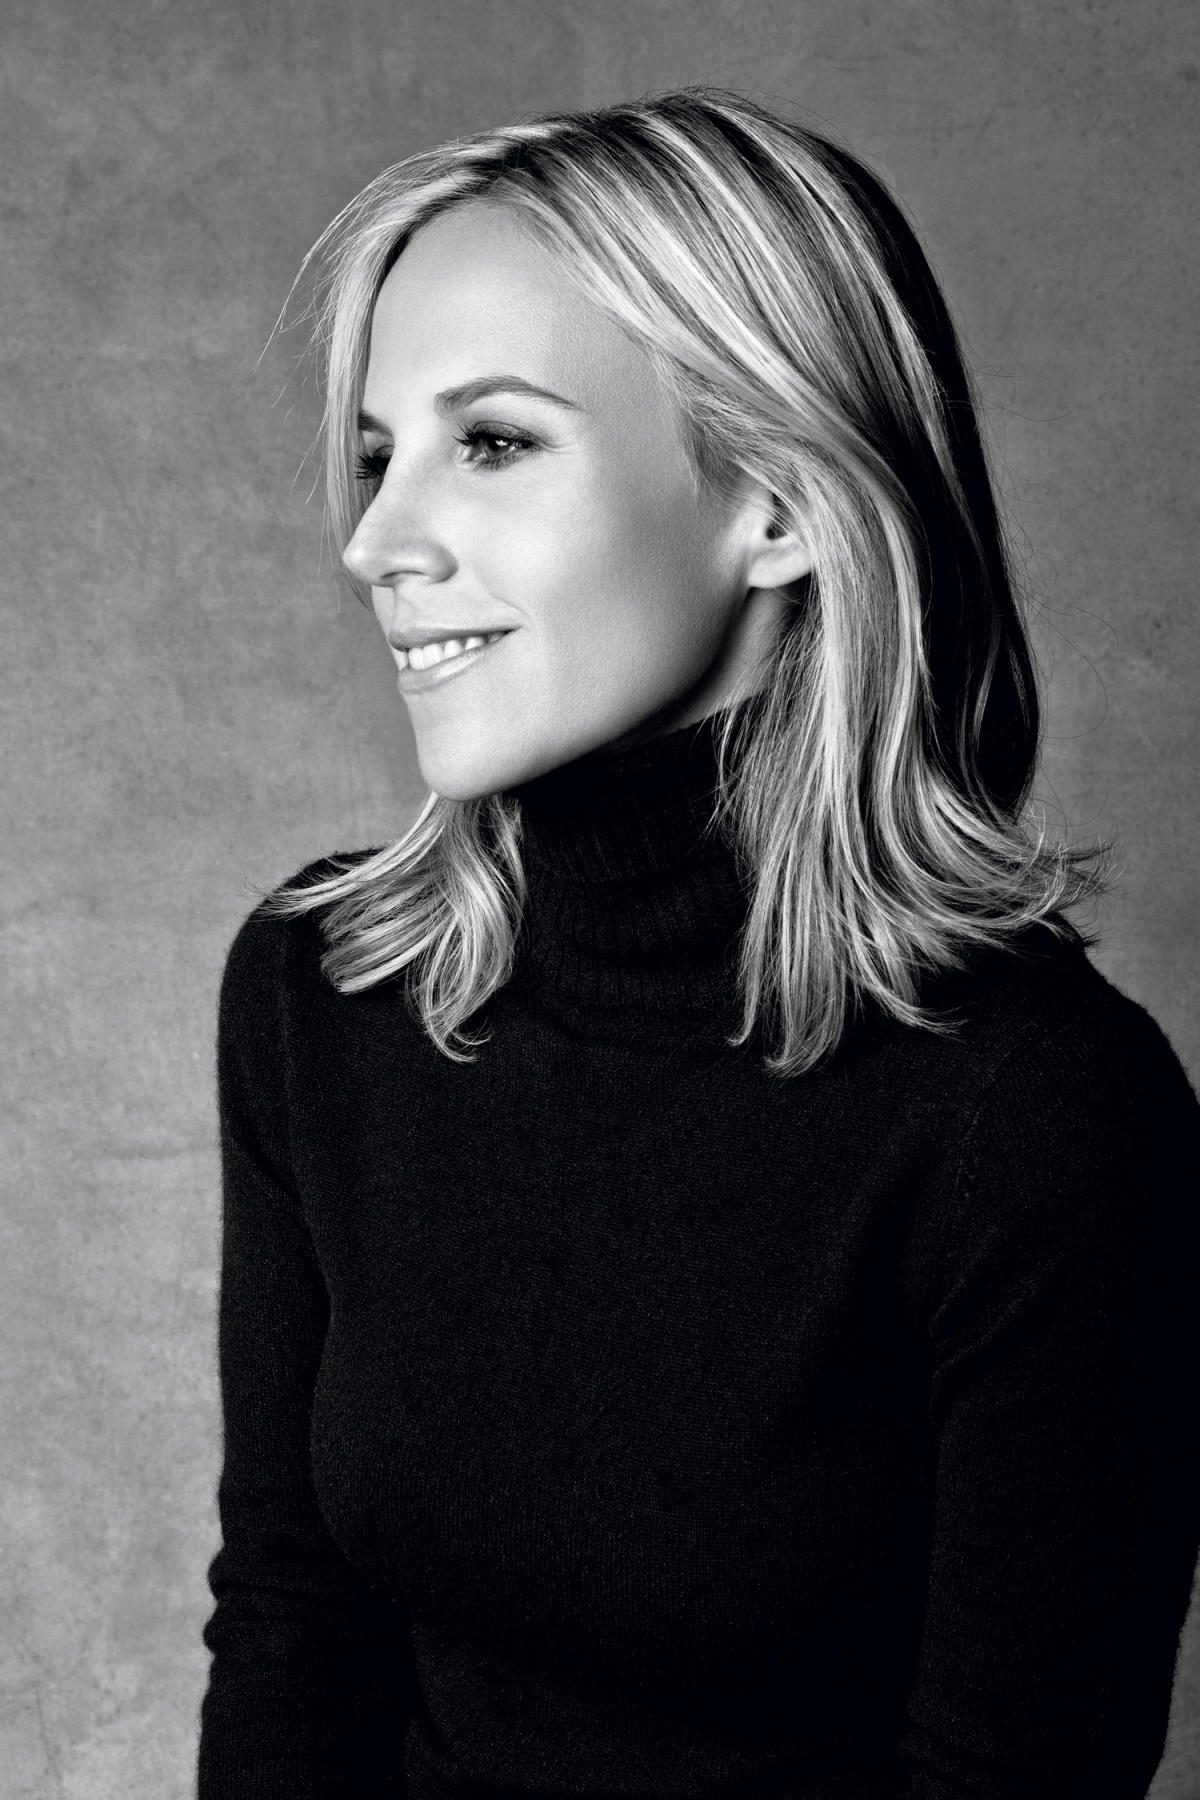 Tory Burch Opens Applications for Annual Small Business Fellowship